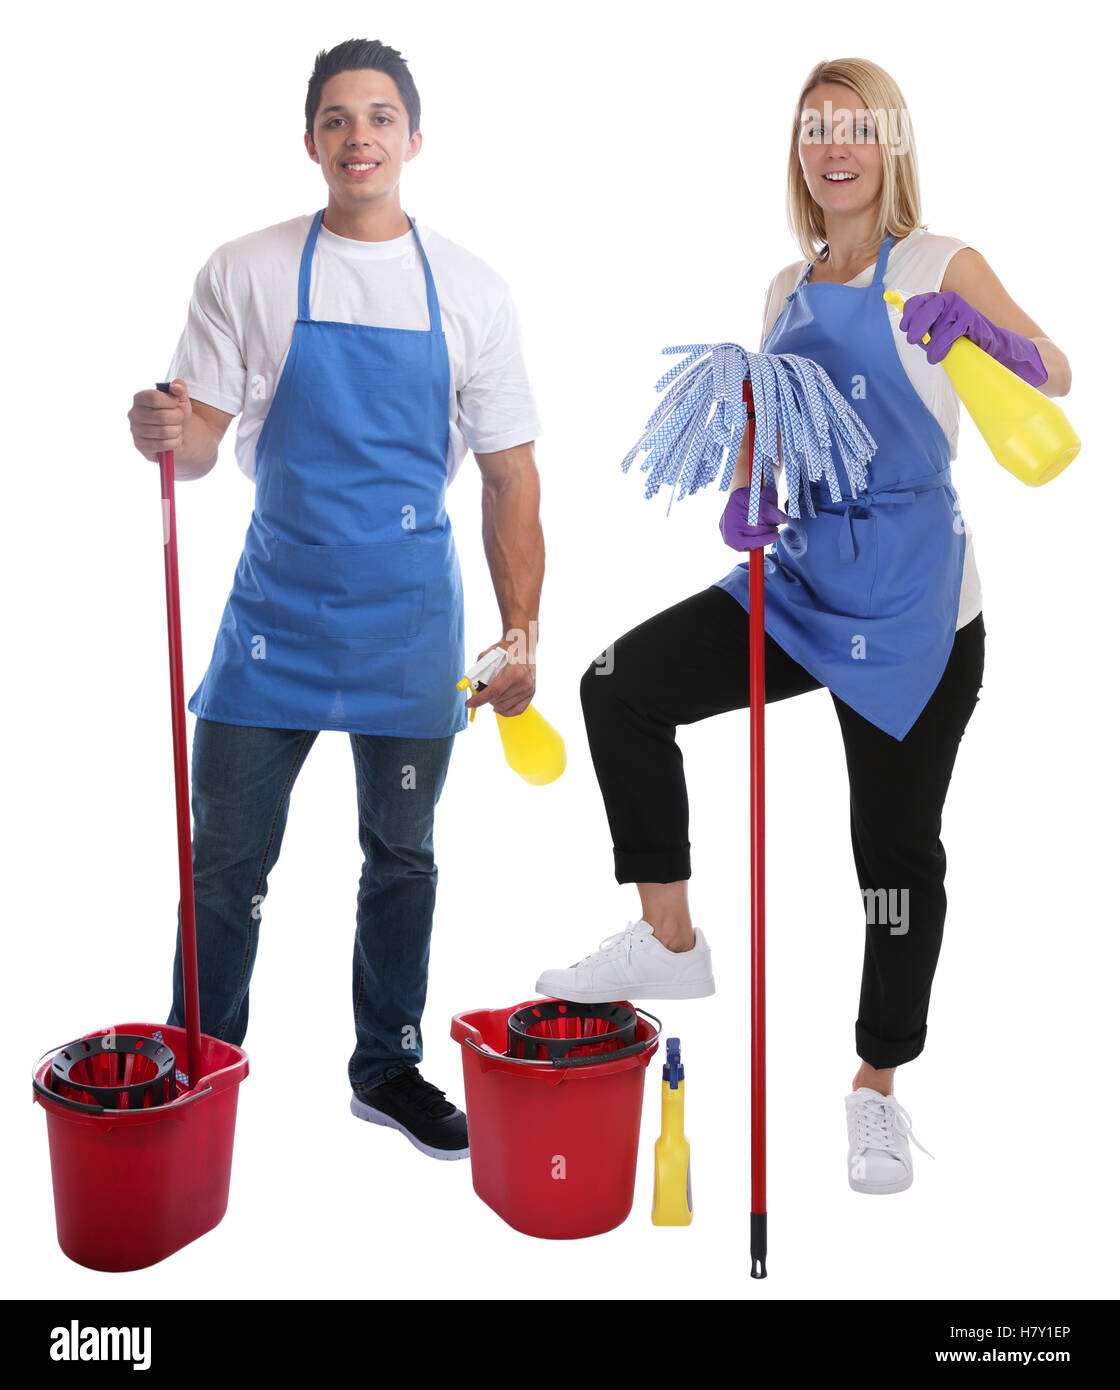 Cleaning lady person service cleaner woman man job occupation full body portrait young people isolated on a white background Stock Photo